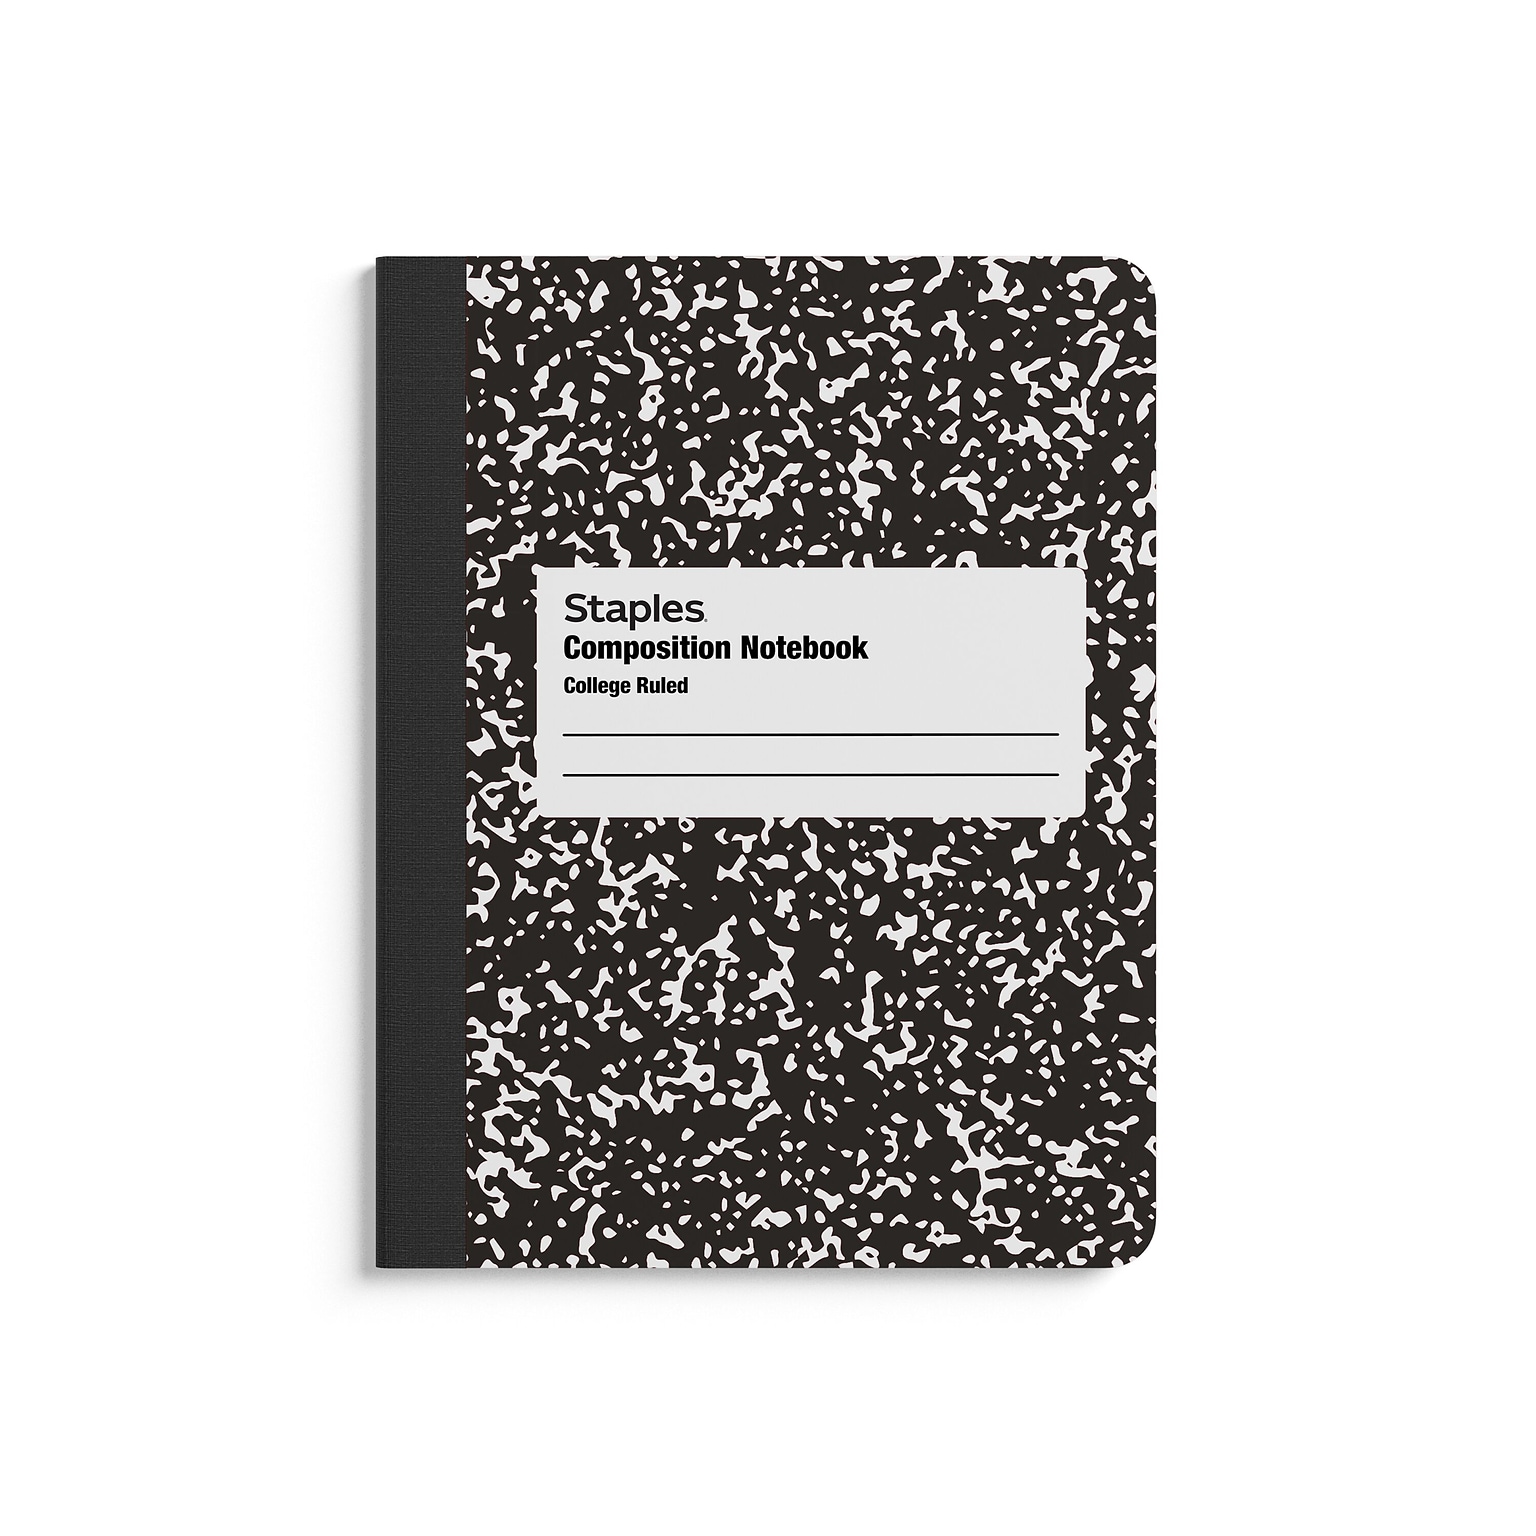 Staples Mini Composition Notebook, 3.25 x 4.5, College Ruled, 80 Sheets, Assorted Colors, 2/Pack (ST17501)